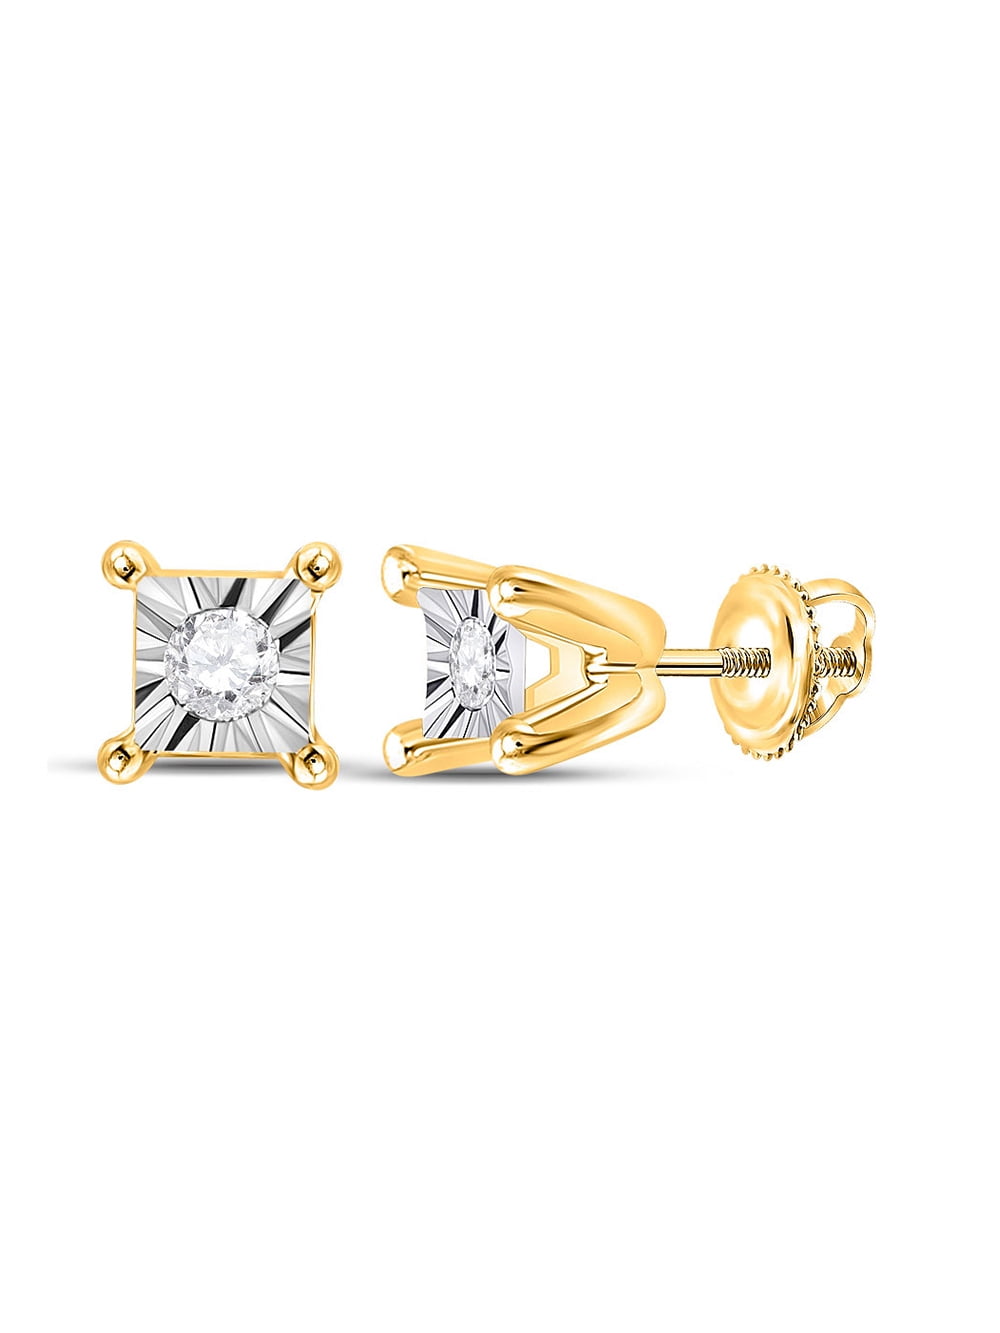 10kt Yellow Gold Womens Round Diamond Solitaire Square Stud Earrings 1/20 Cttw 